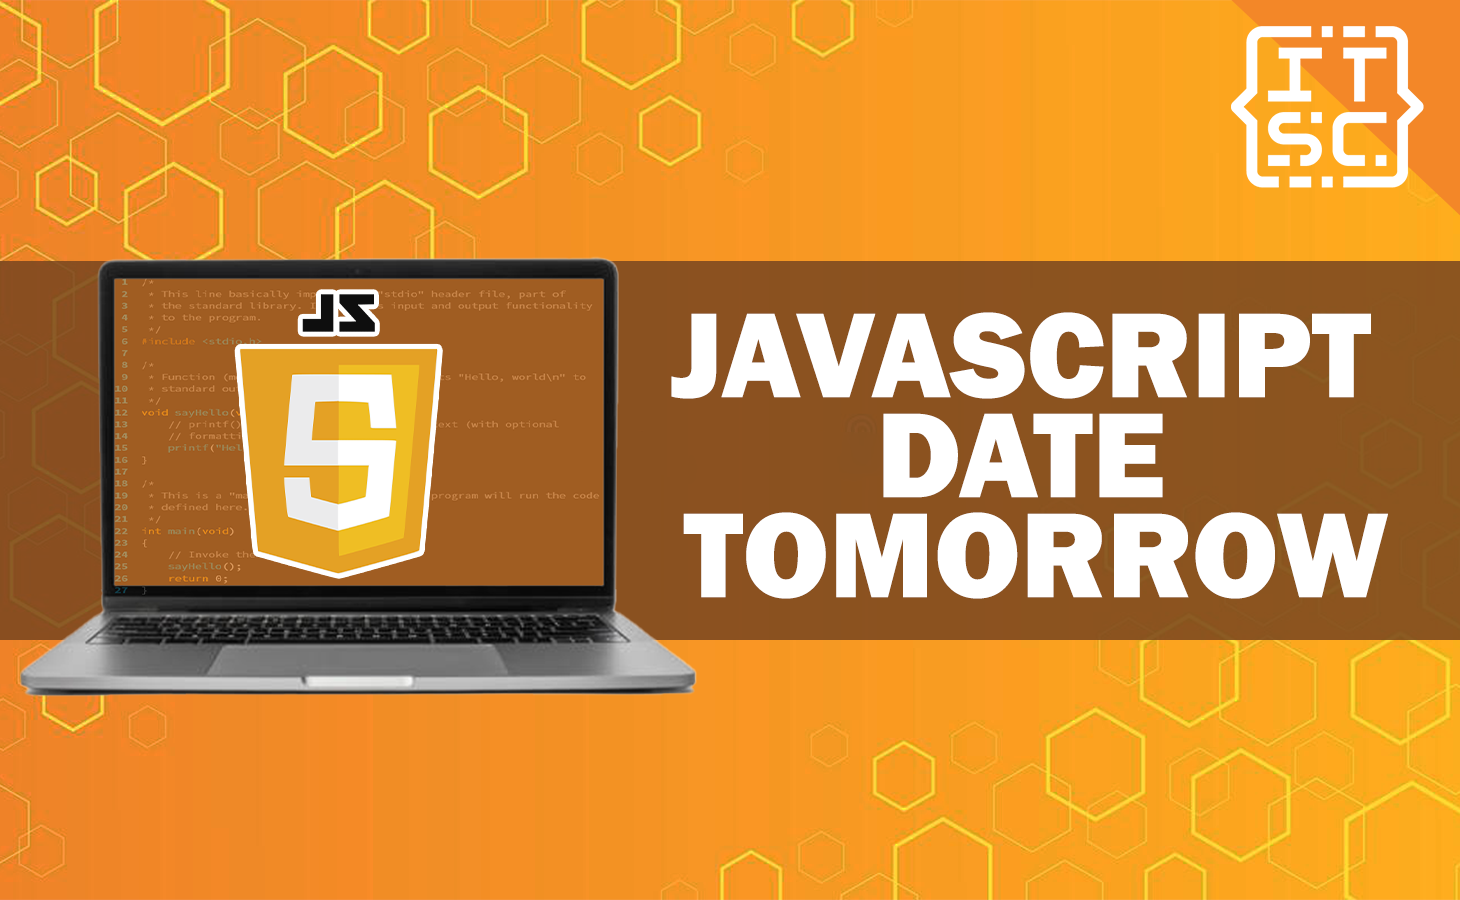 How to get tomorrow's date in JavaScript?